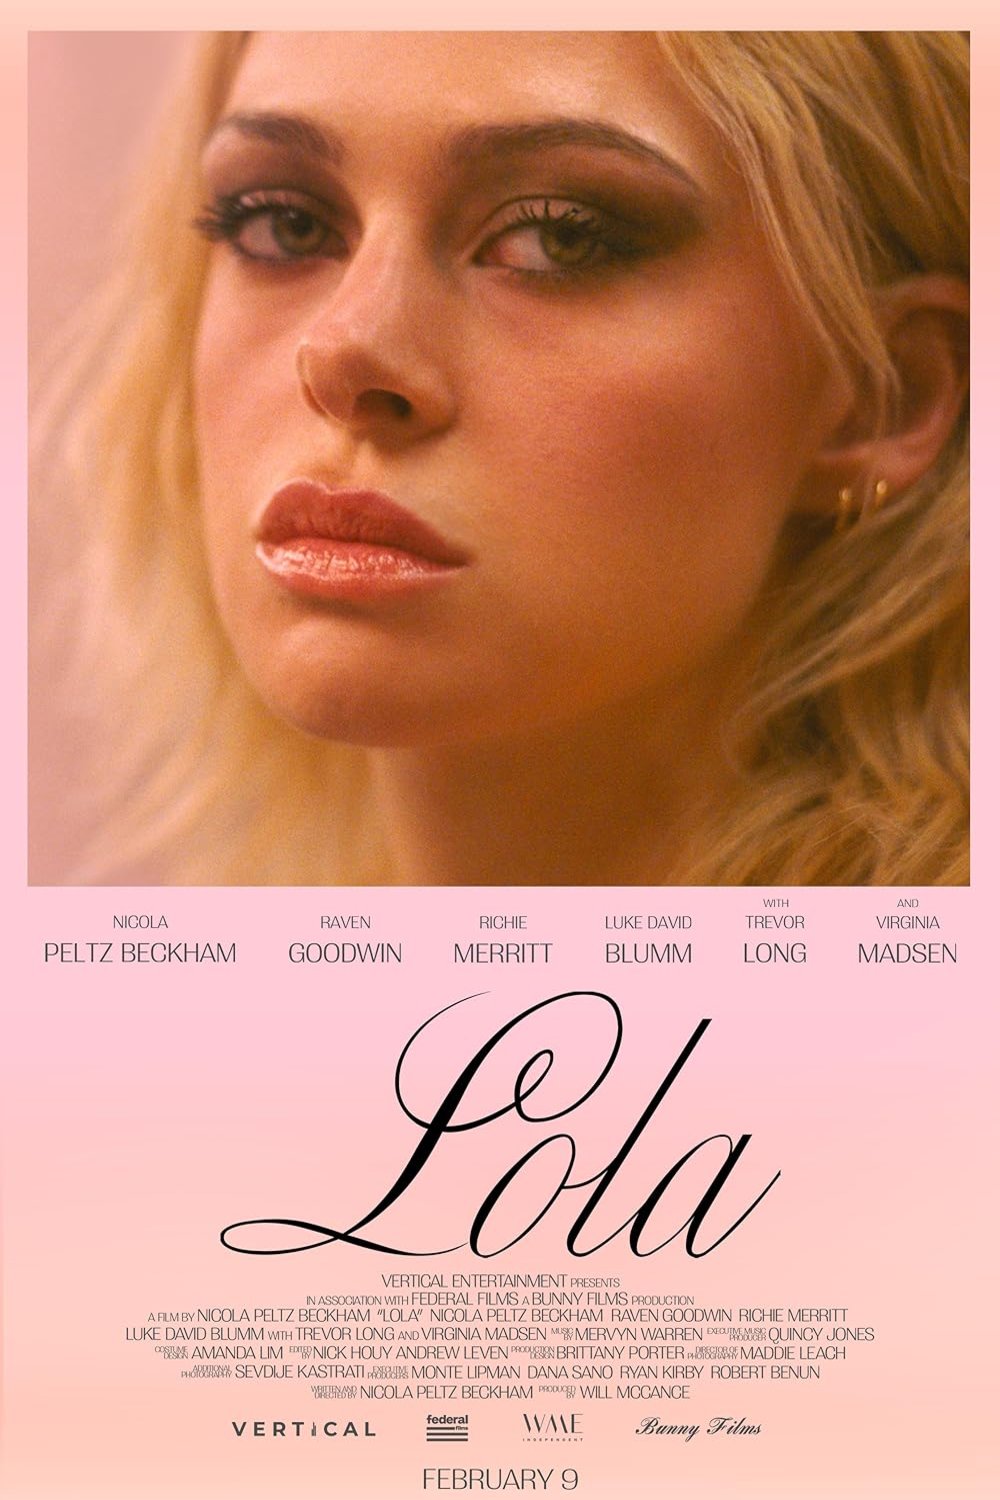 Poster of the movie Lola